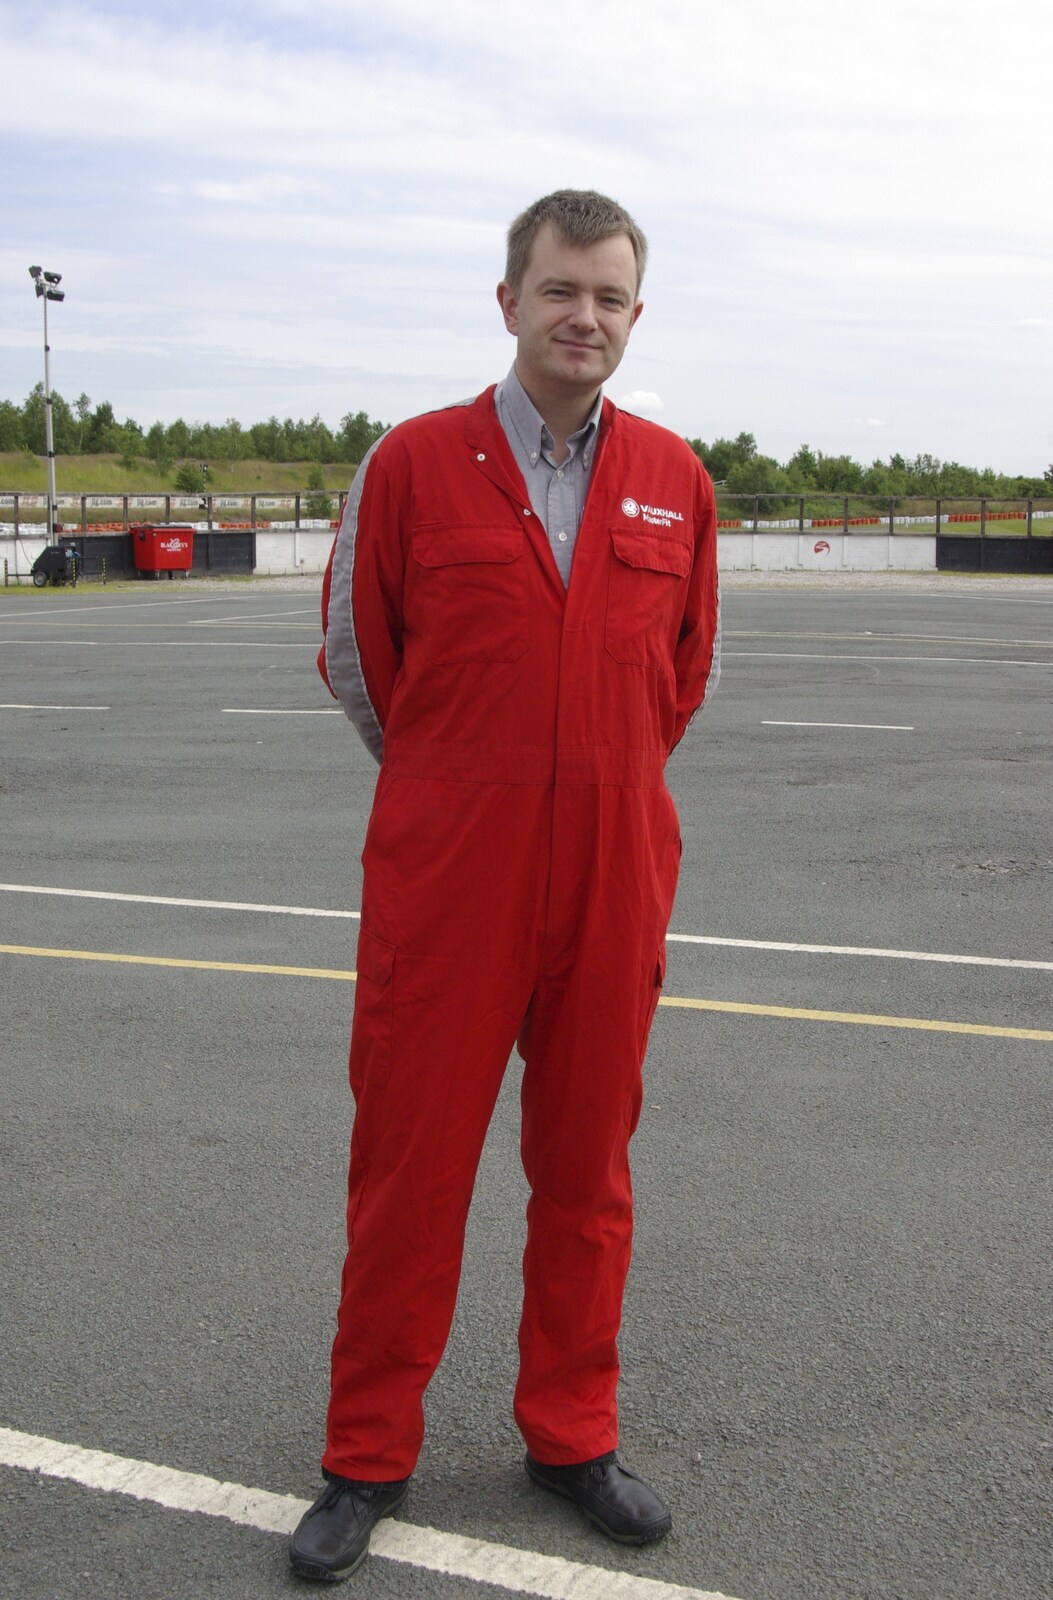 Driving a Racing Car, Three Sisters Racetrack, Wigan, Lancashire - 24th June 2008: Nosher in overalls at the Three Sisters Racetrack